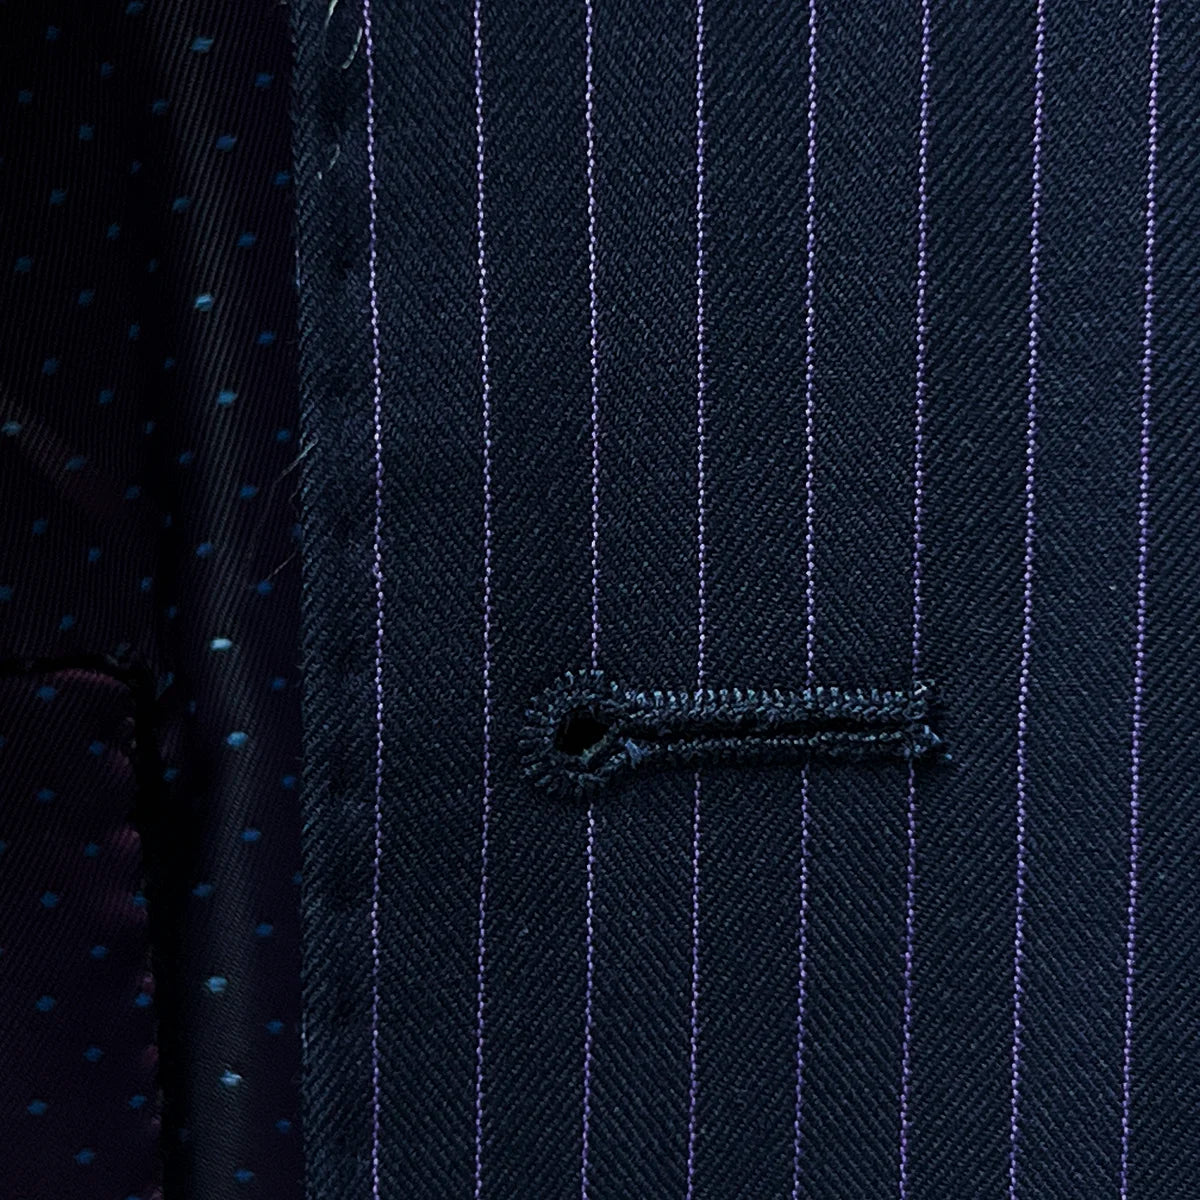 Close-up view of a buttonhole, a fine detail on a navy suit with purple pinstripes.